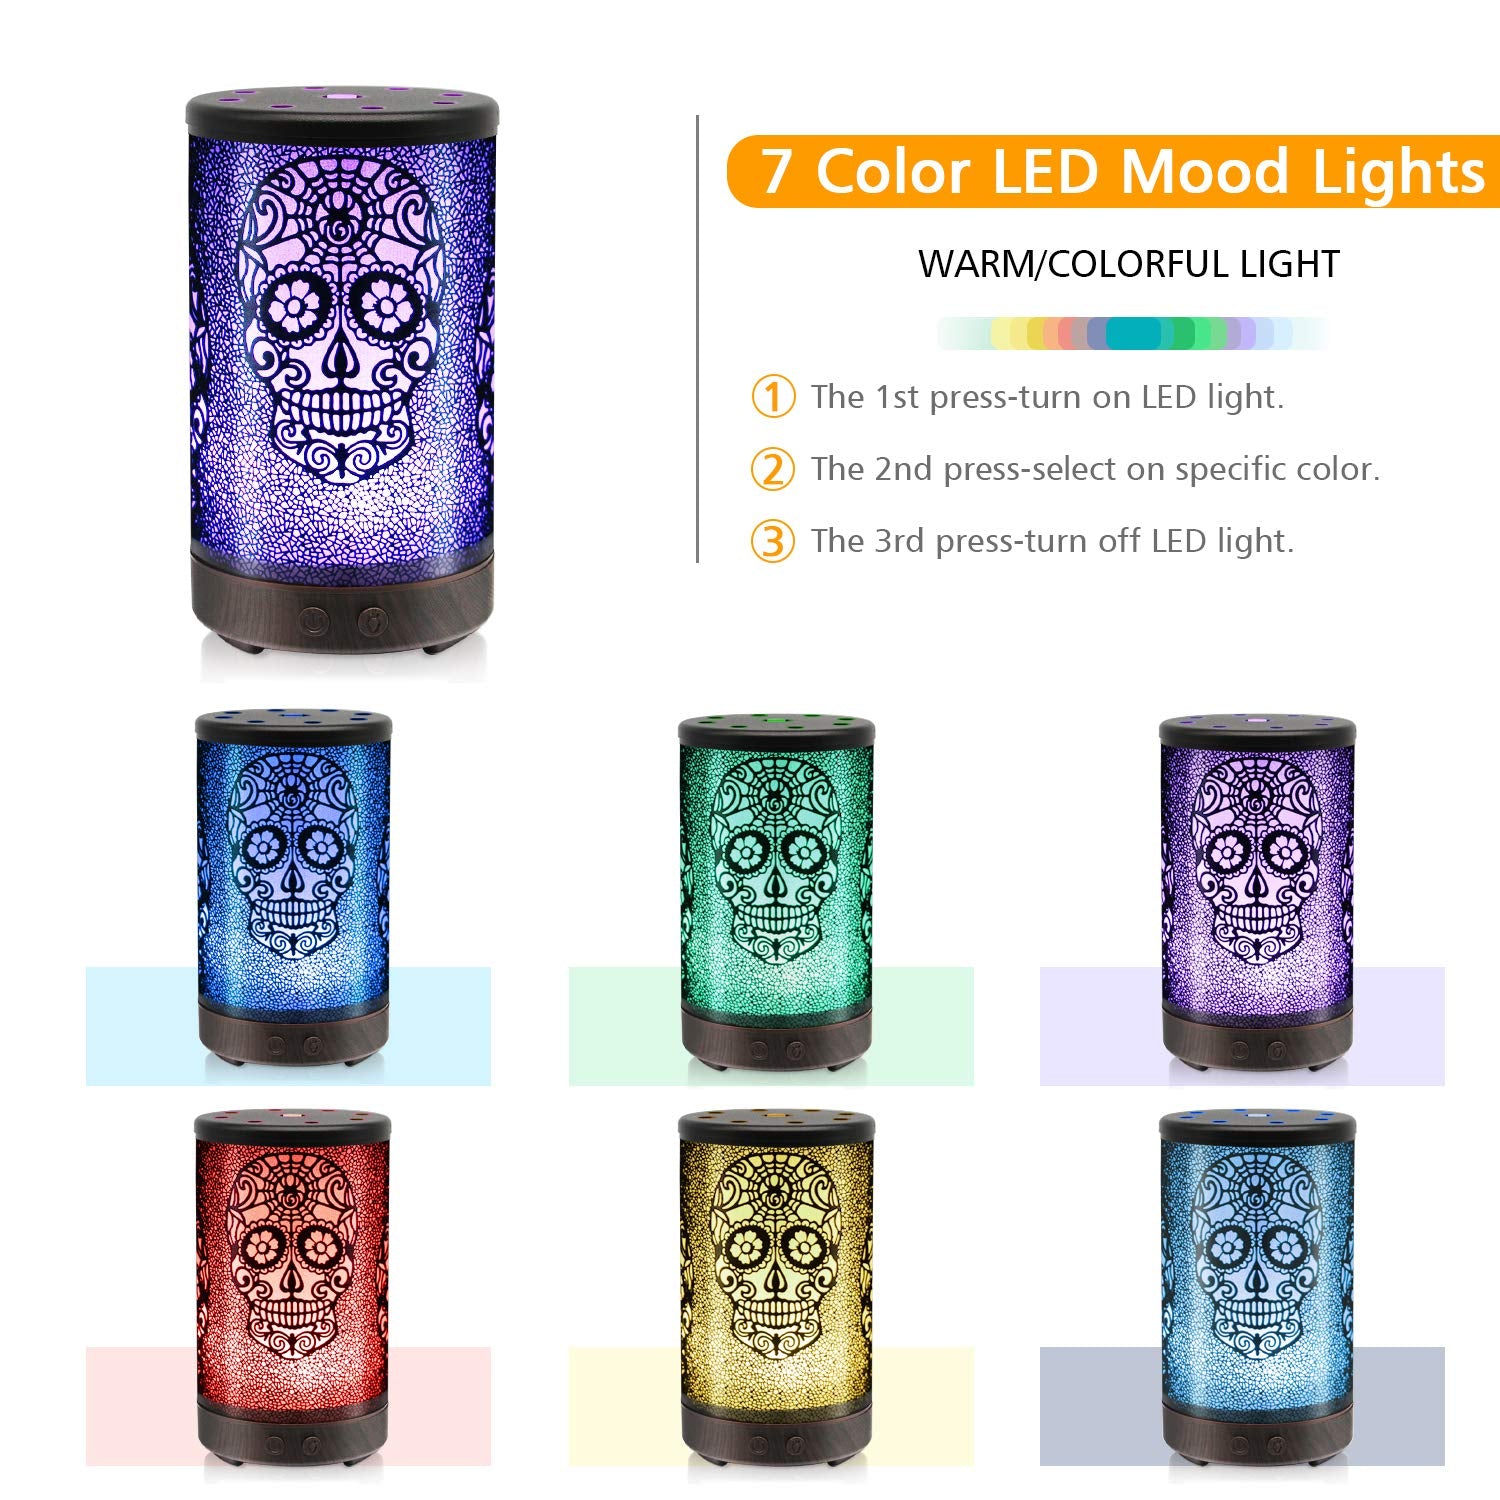 Skull Essential Oil Diffuser, Daroma 100ml Metal Aromatherapy Ultrasonic Cool Mist Humidifier Air Scent Home Office Gift, Waterless Auto-Off